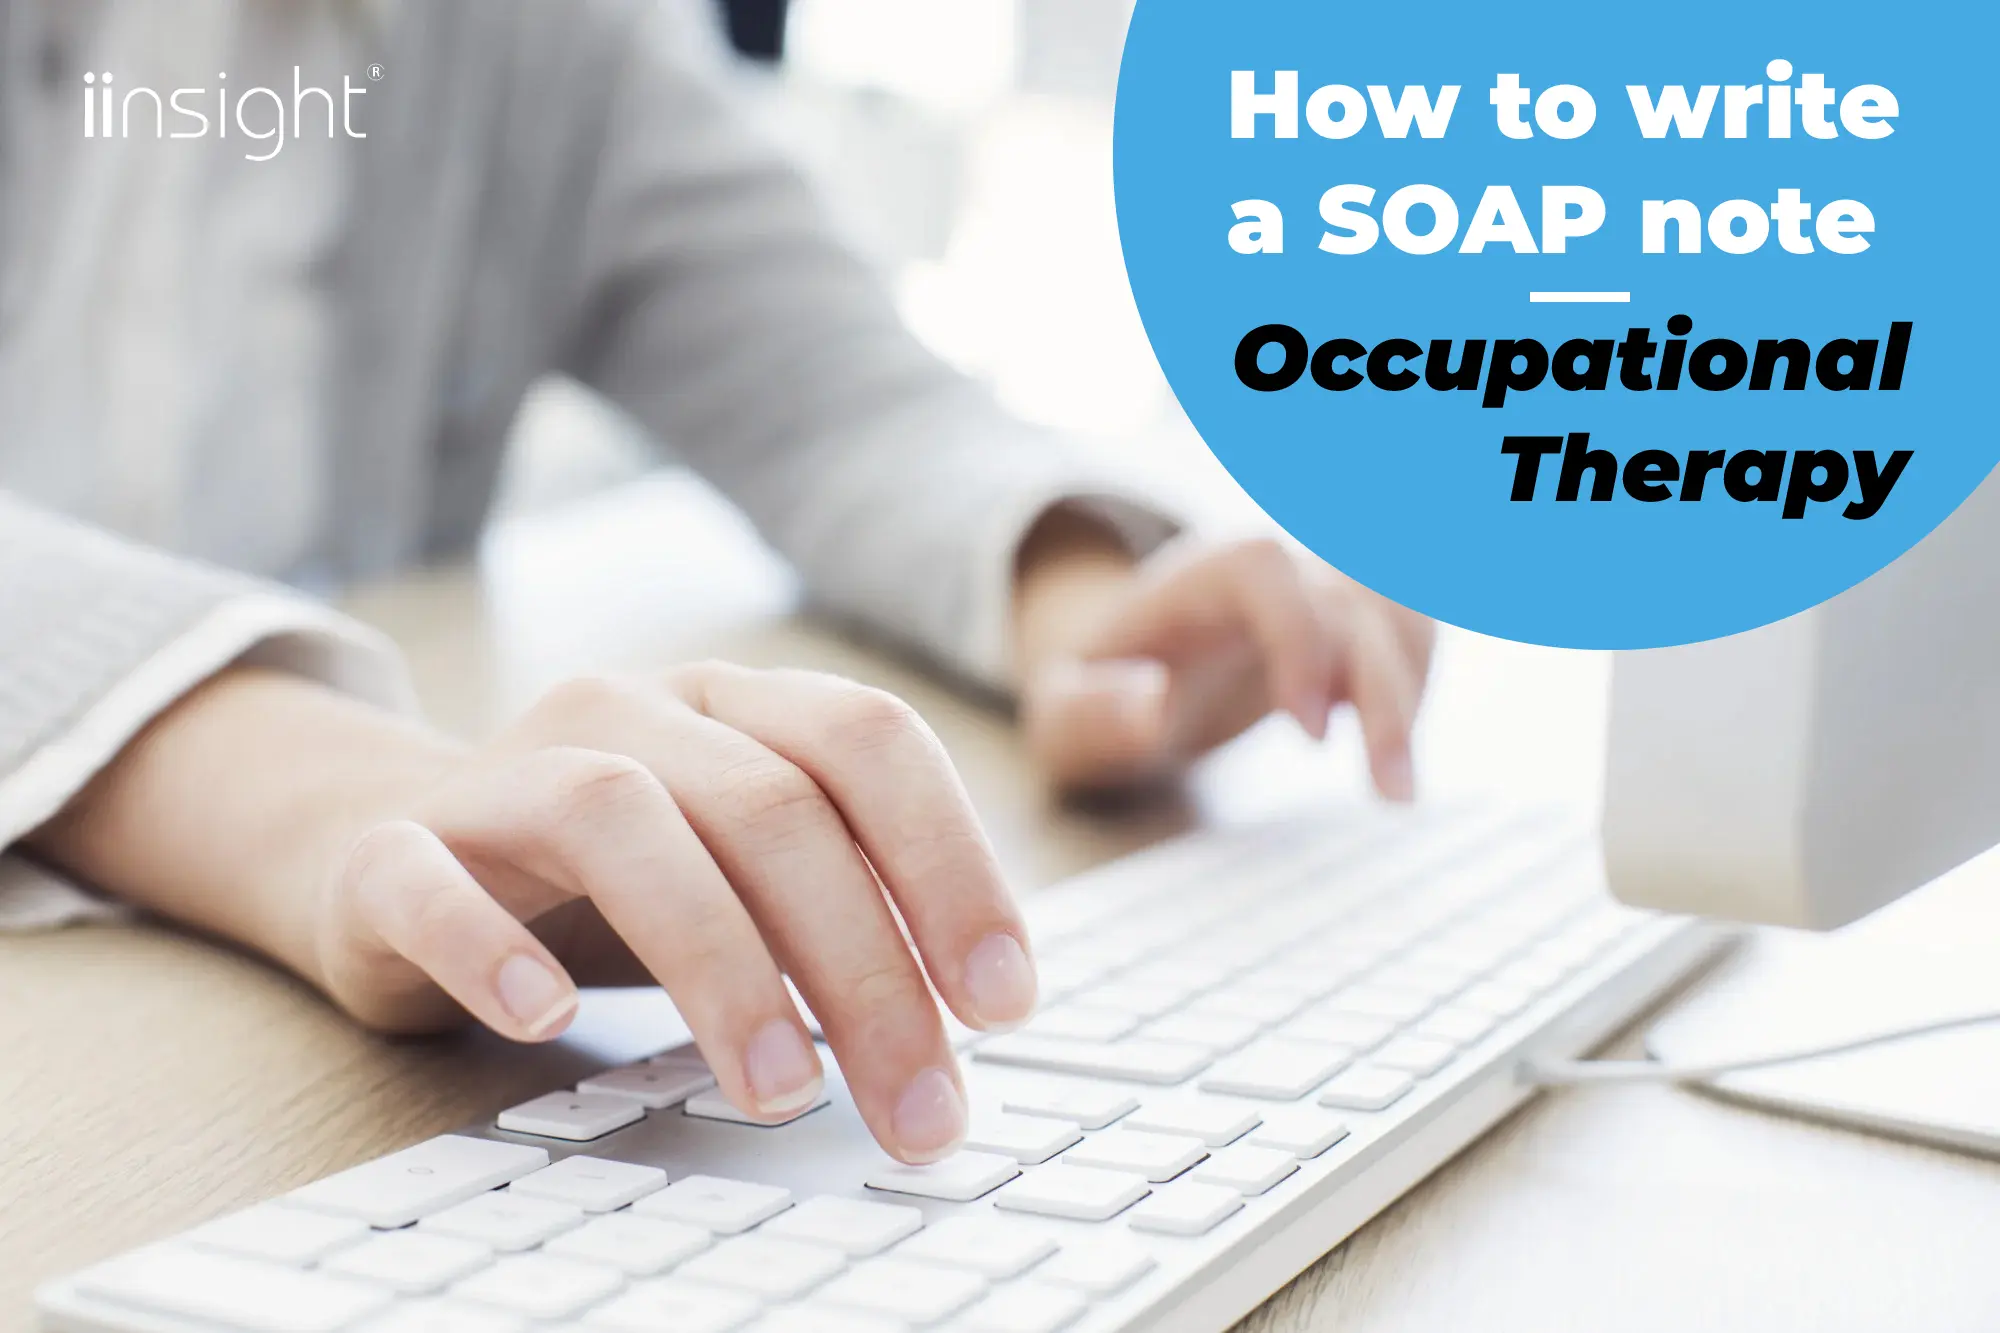 How to Write a SOAP Note in Occupational Therapy